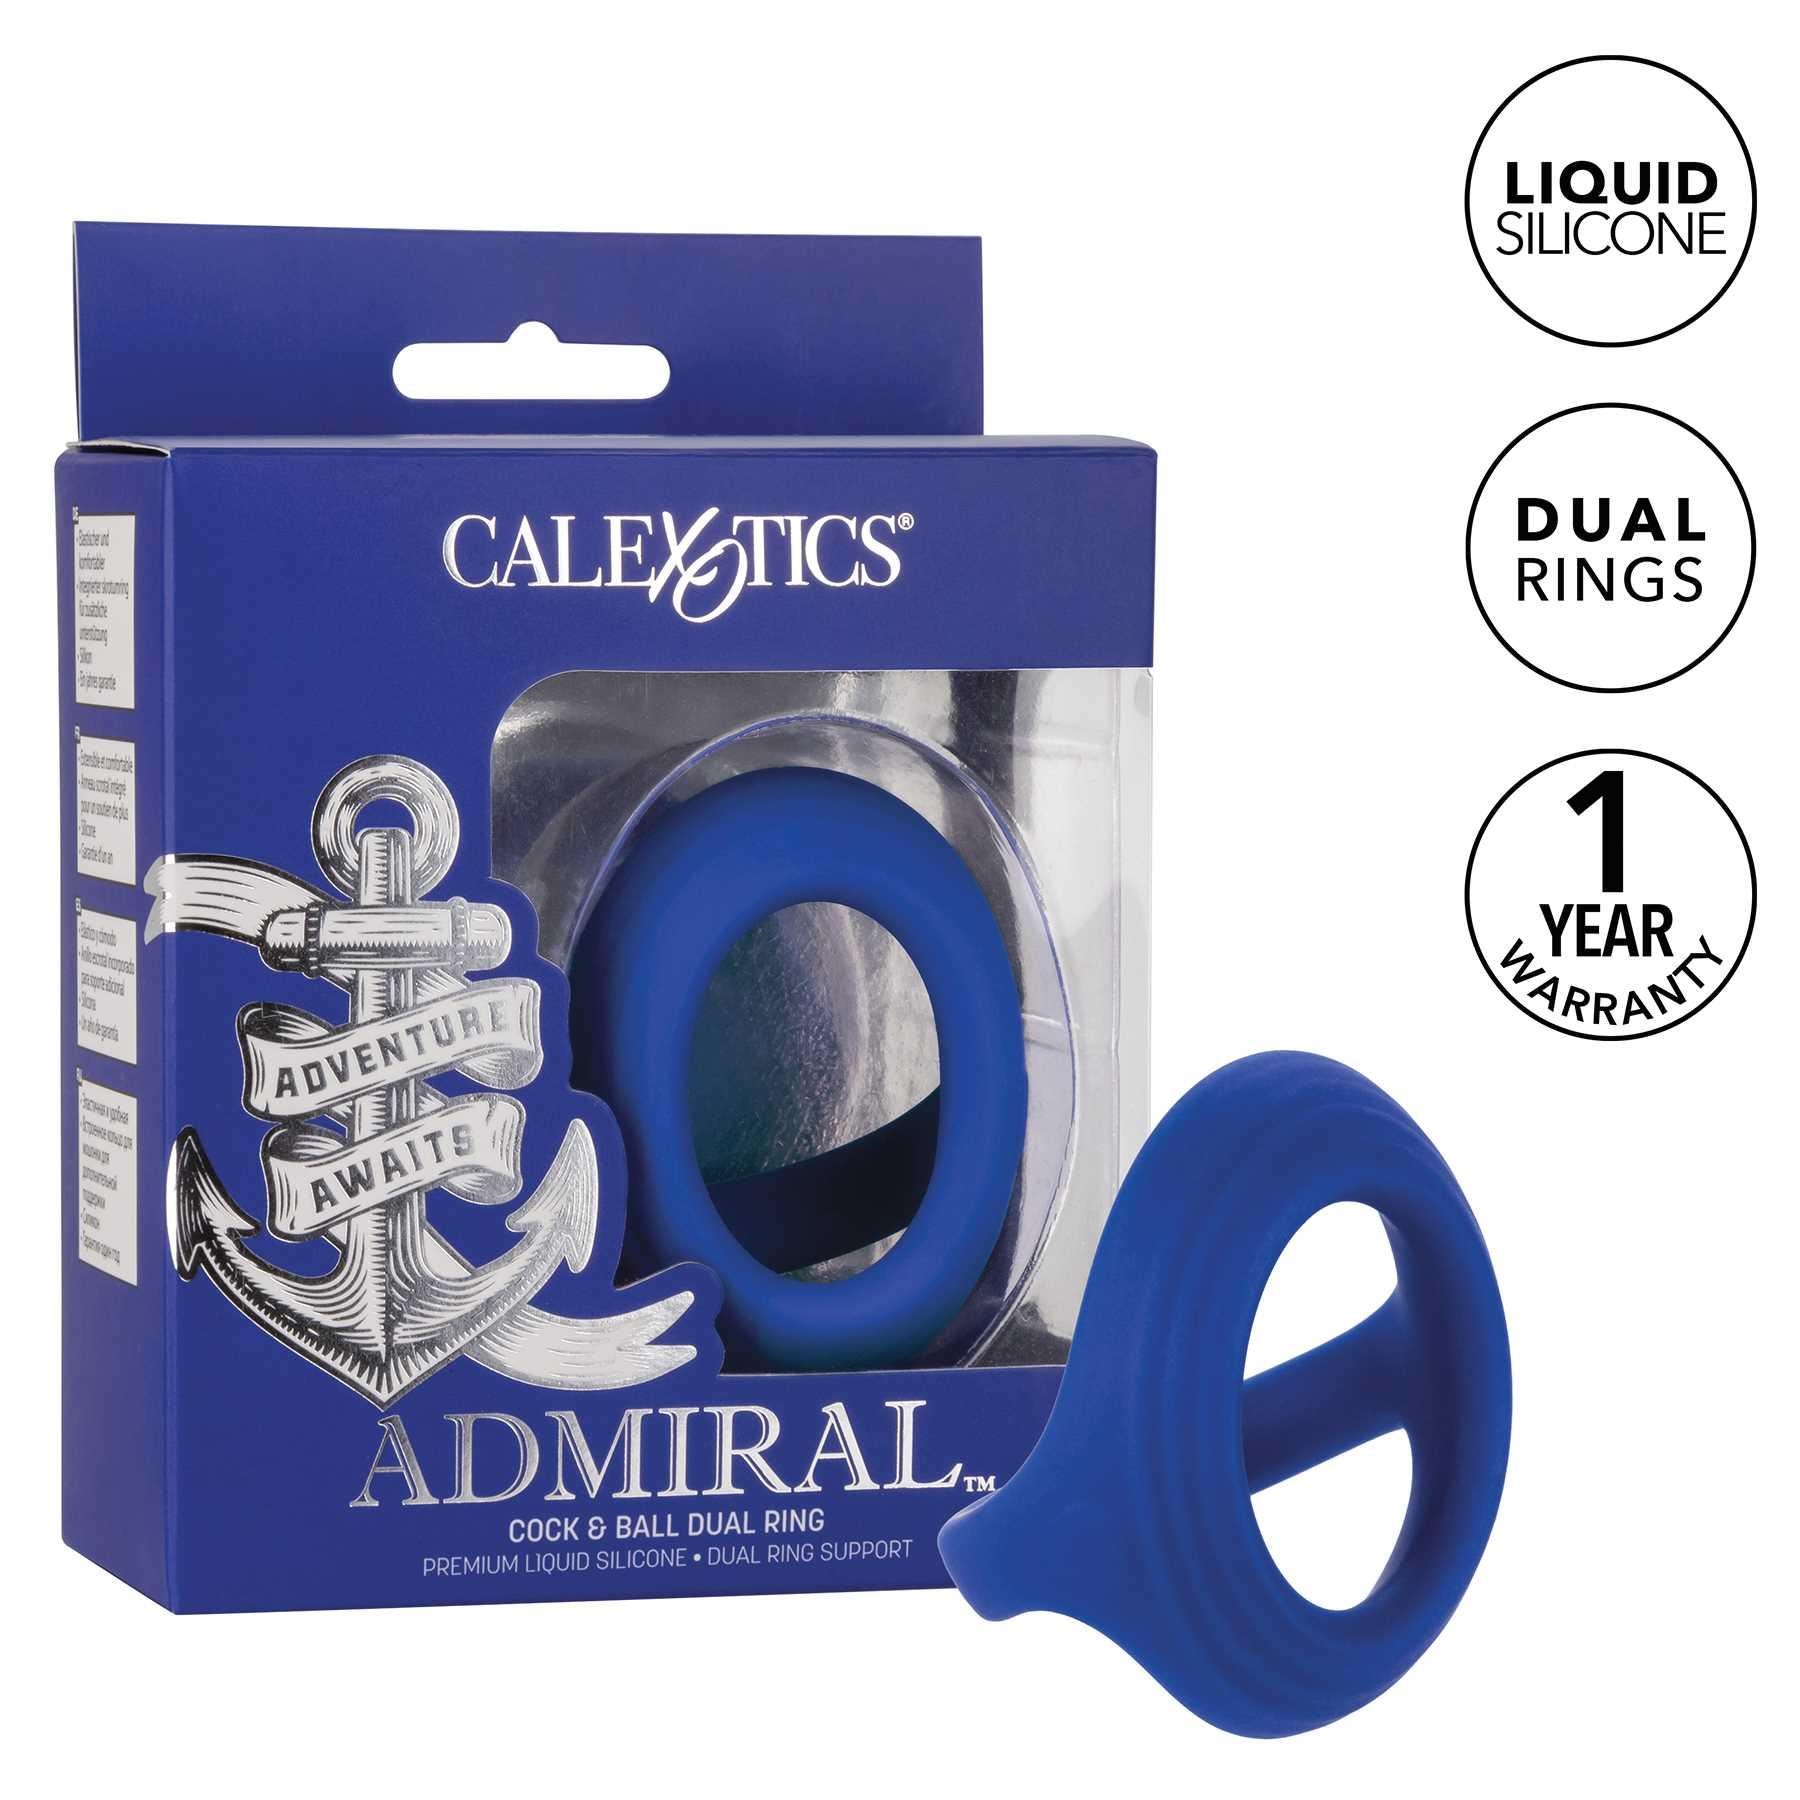 Admiral Cock & Ball Dual Ring with feature listing